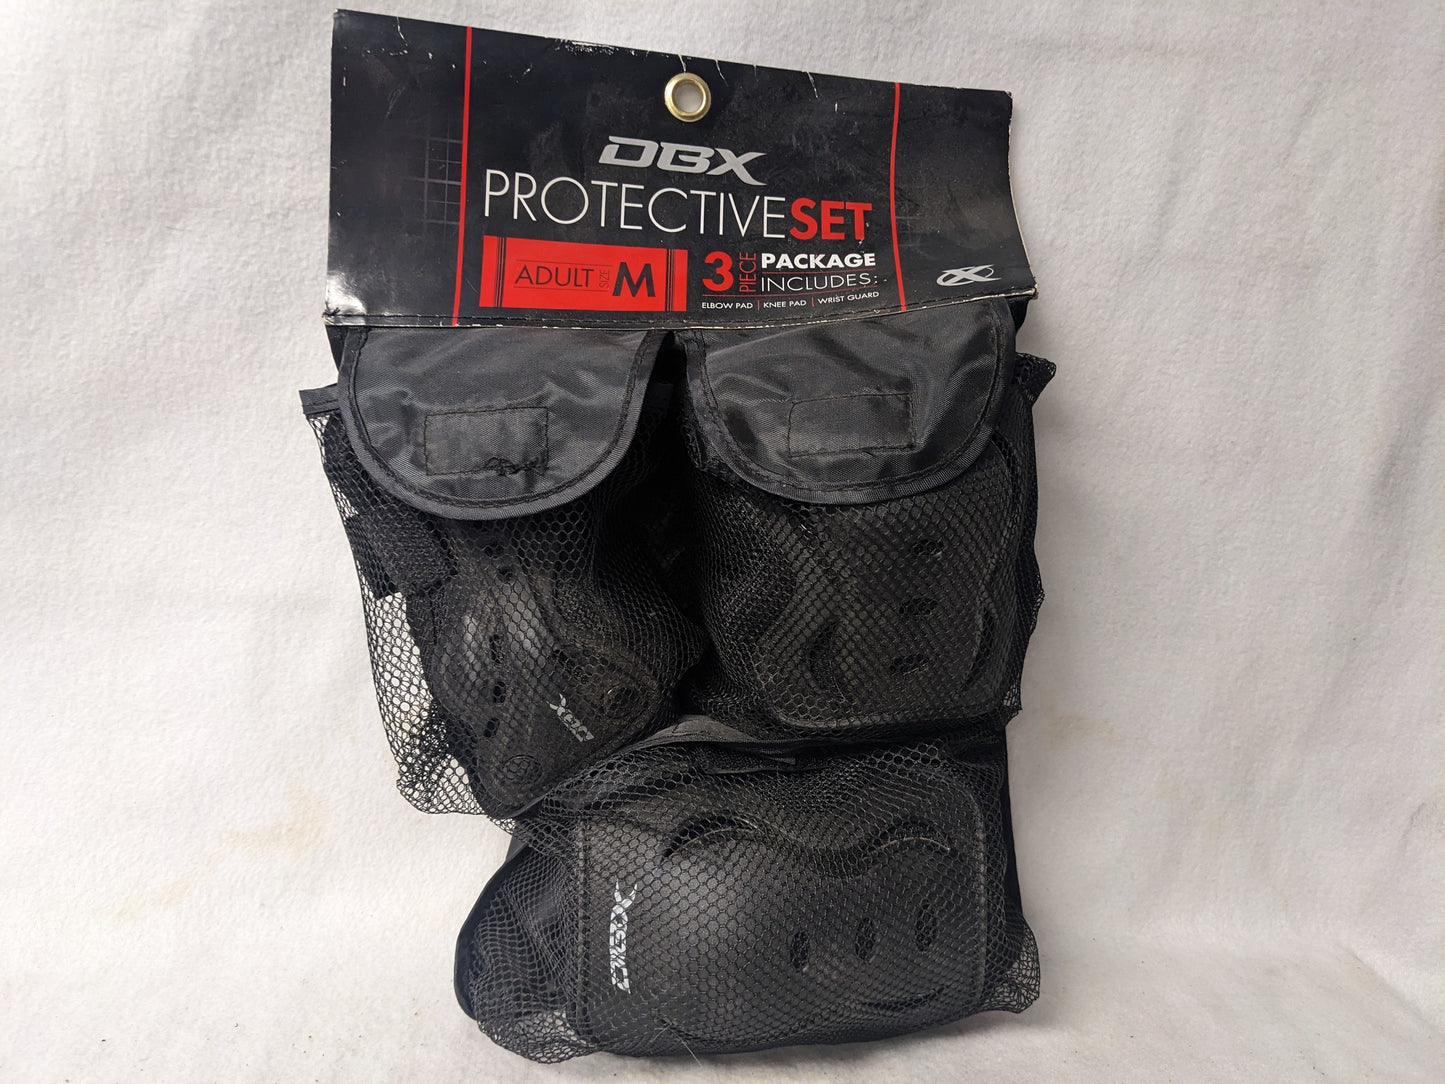 DBX Protective Pad Set (Elbow Knee Wrist) Size Medium Color Black Condition New with Tags